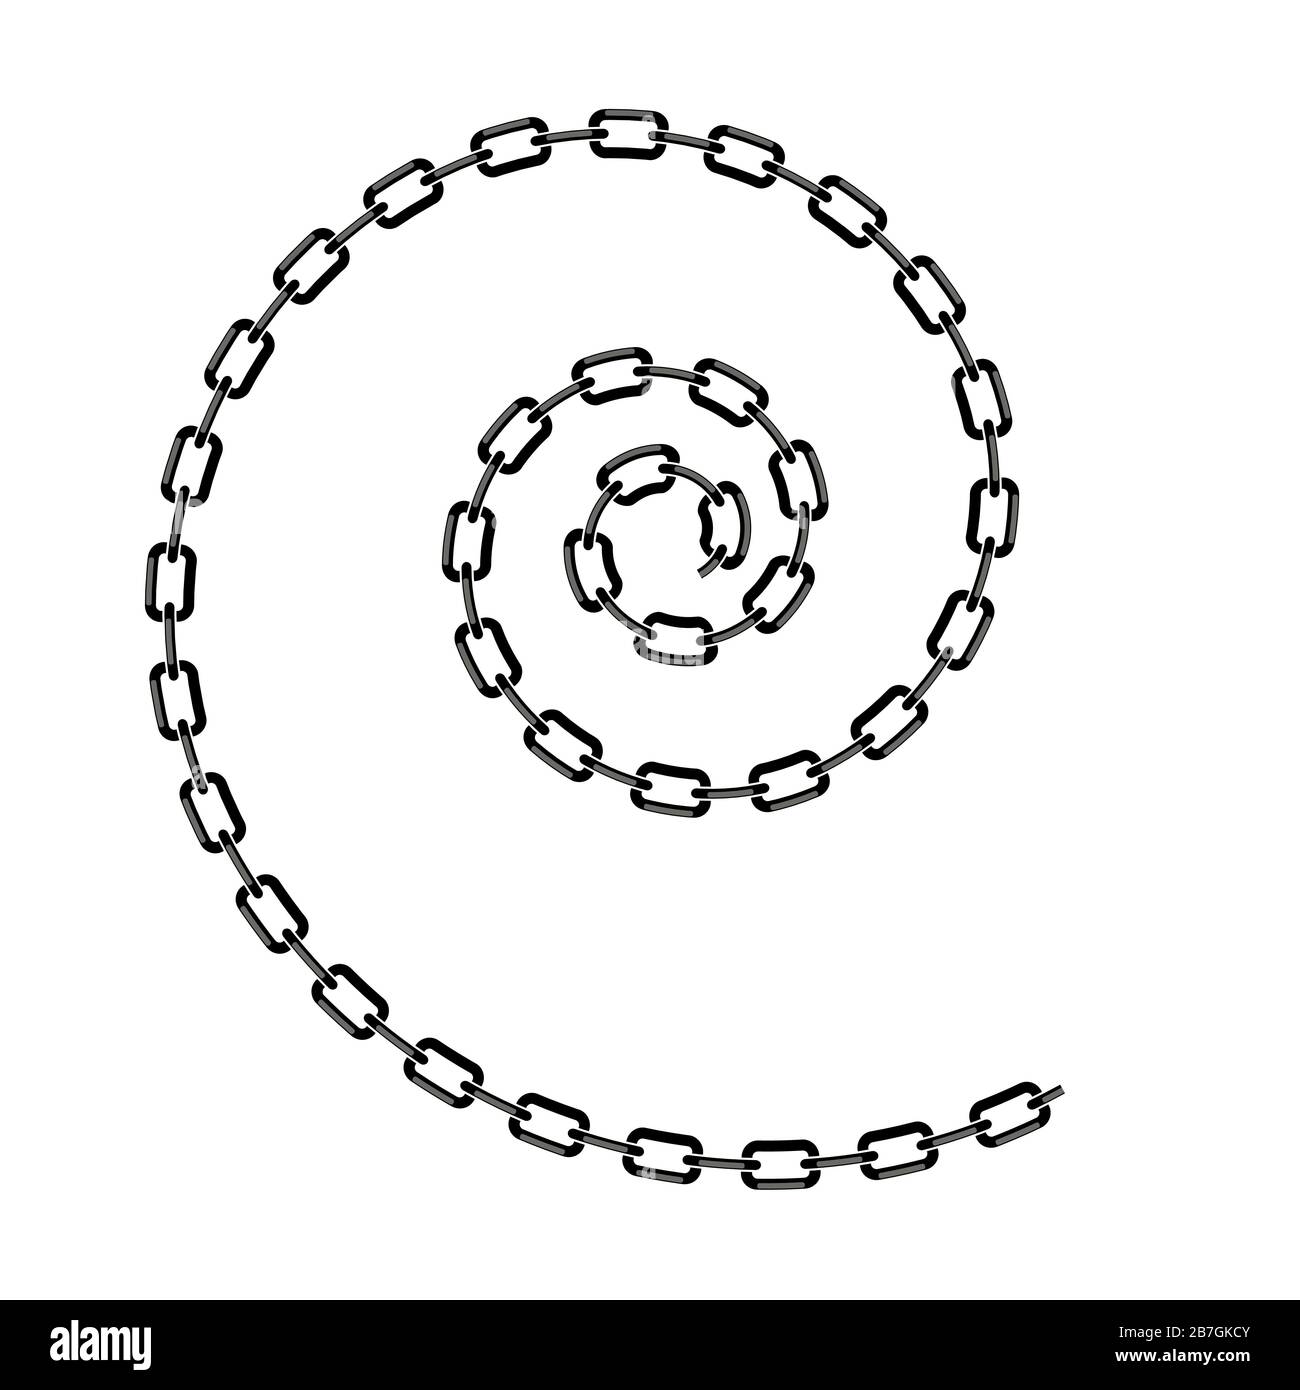 Grey Chain Spiral Isolated on White Background Stock Vector Image & Art ...